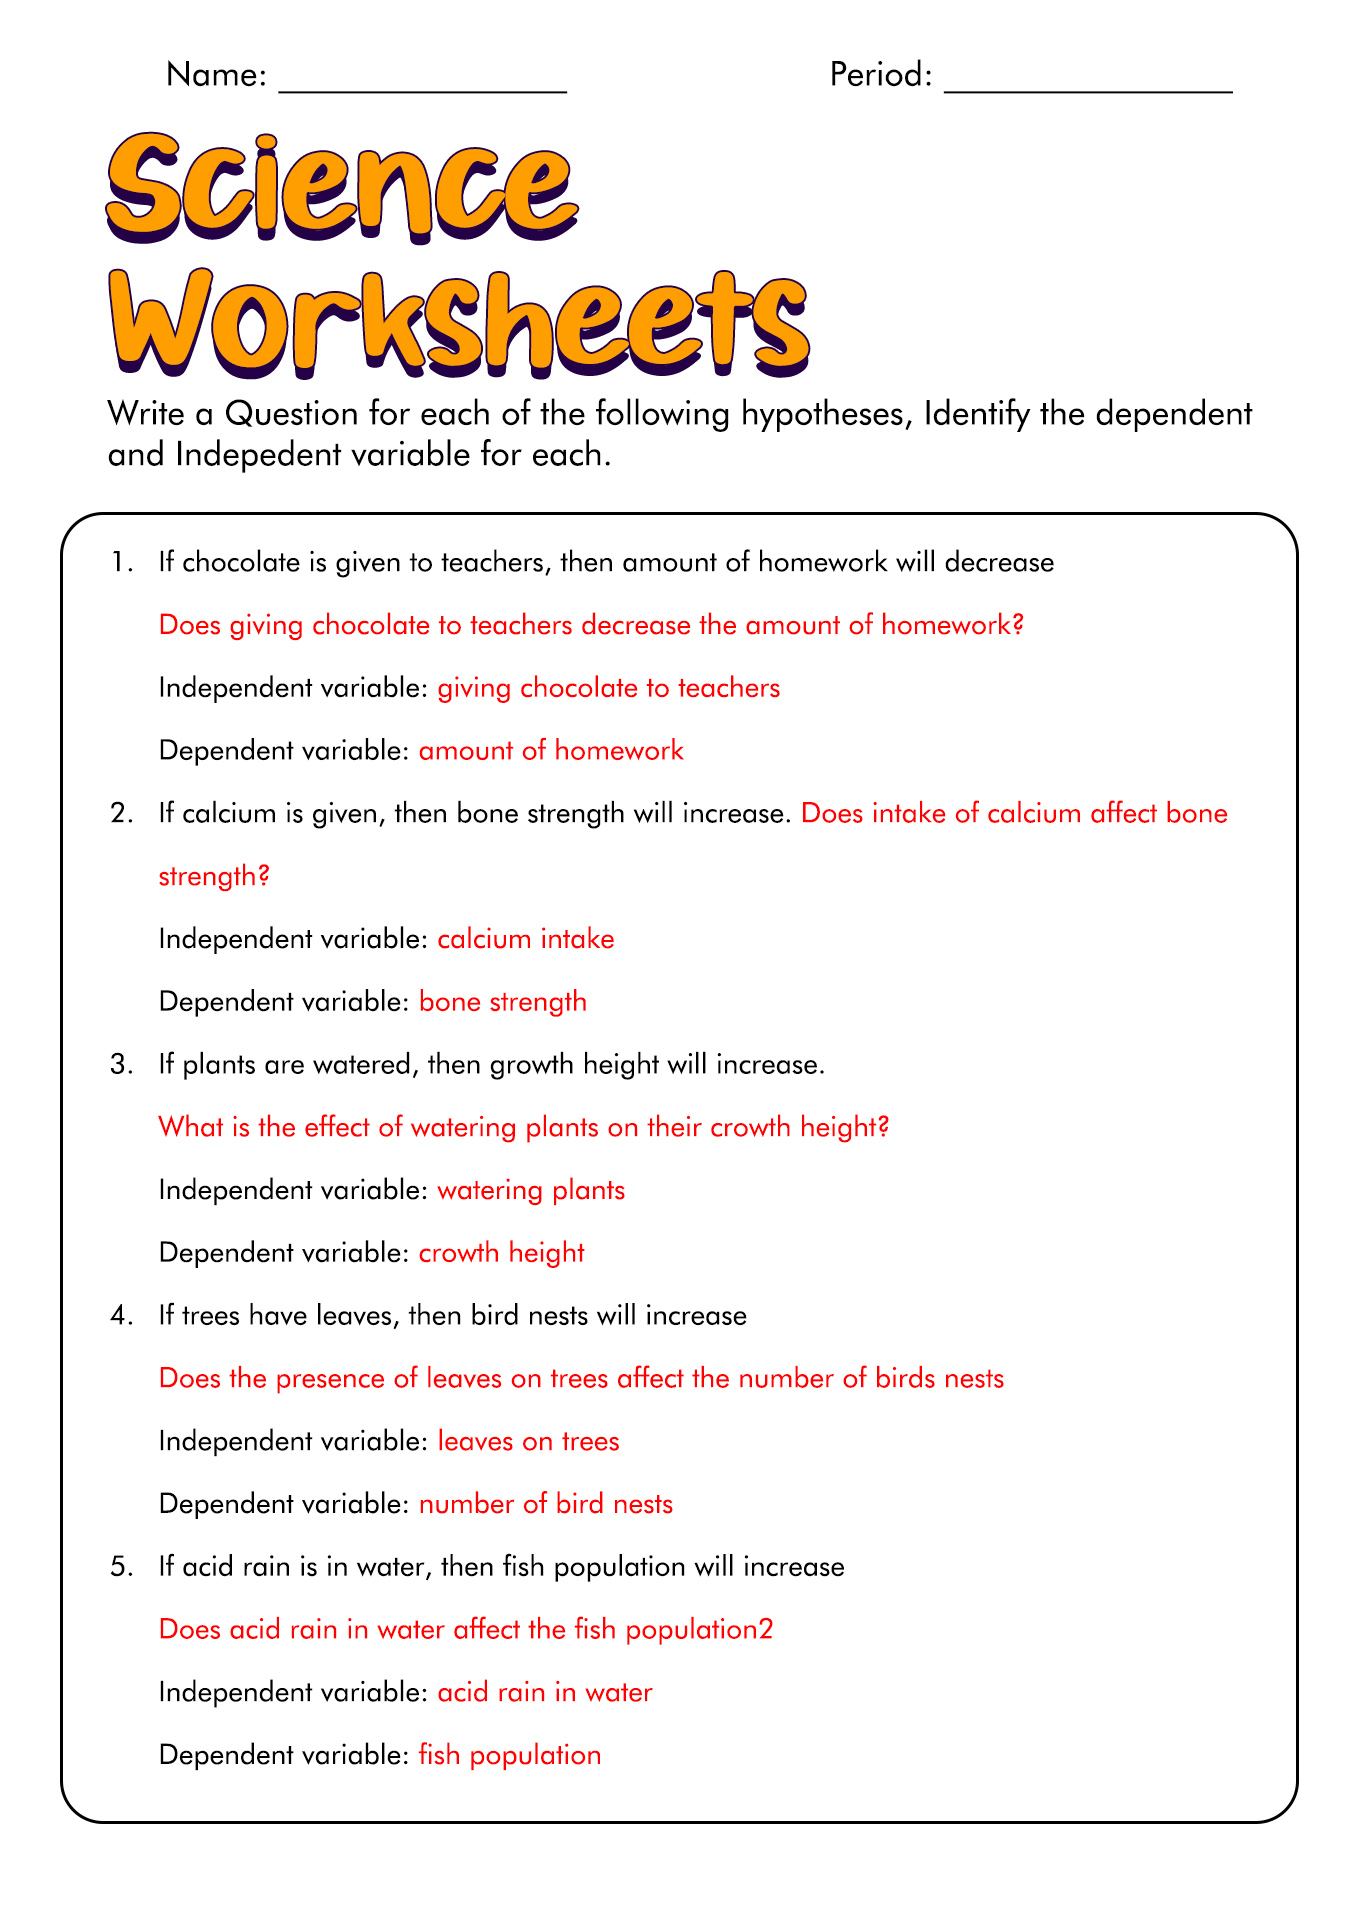 Science Worksheets with Answer Key